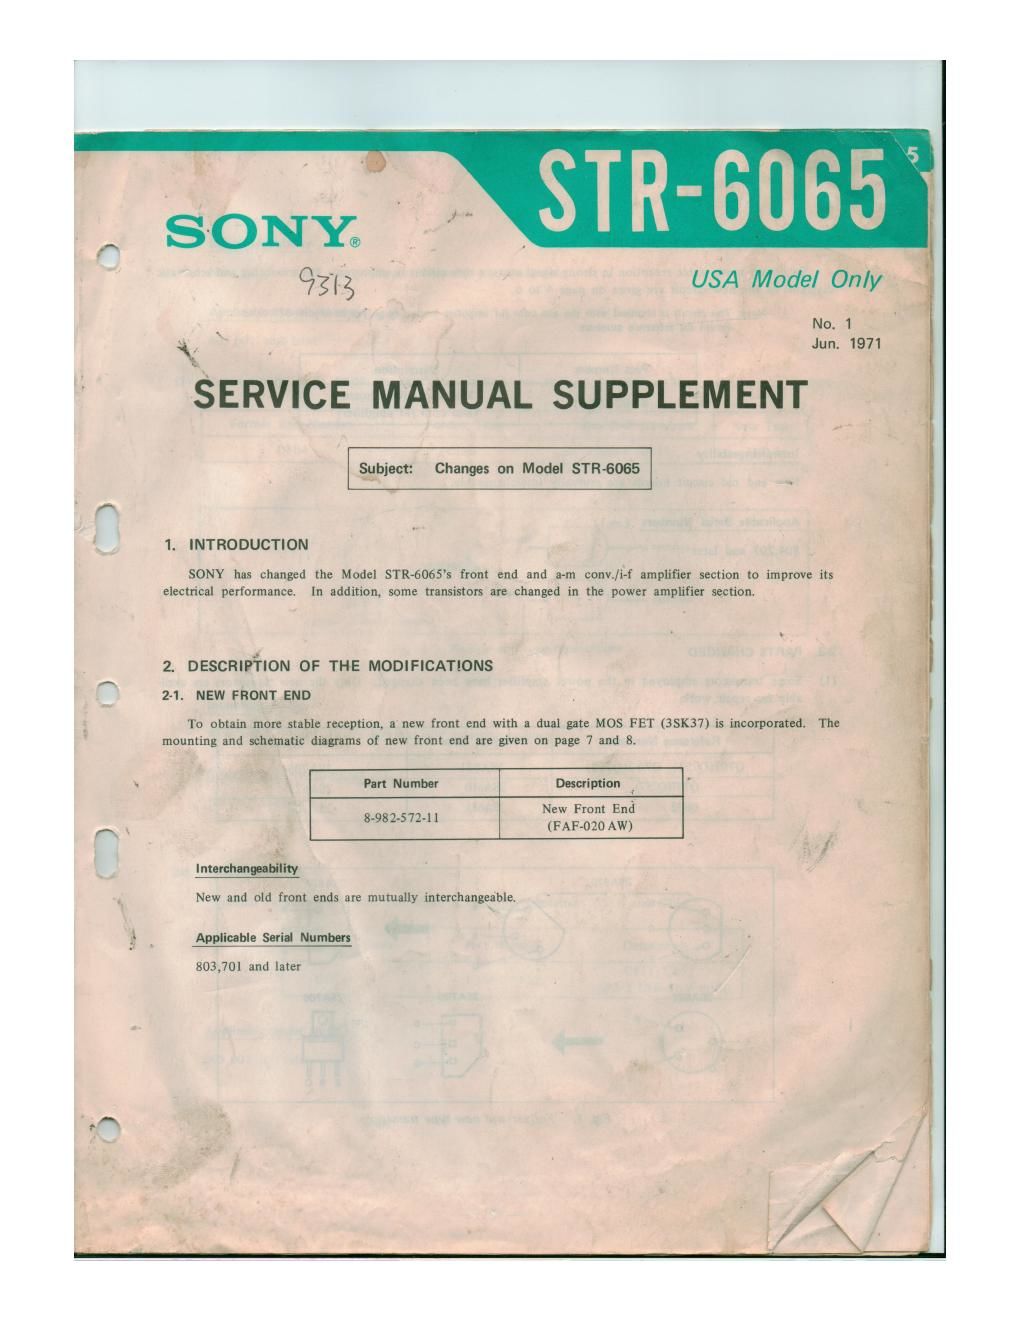 Sony STR 6065 Service Manual Supplement